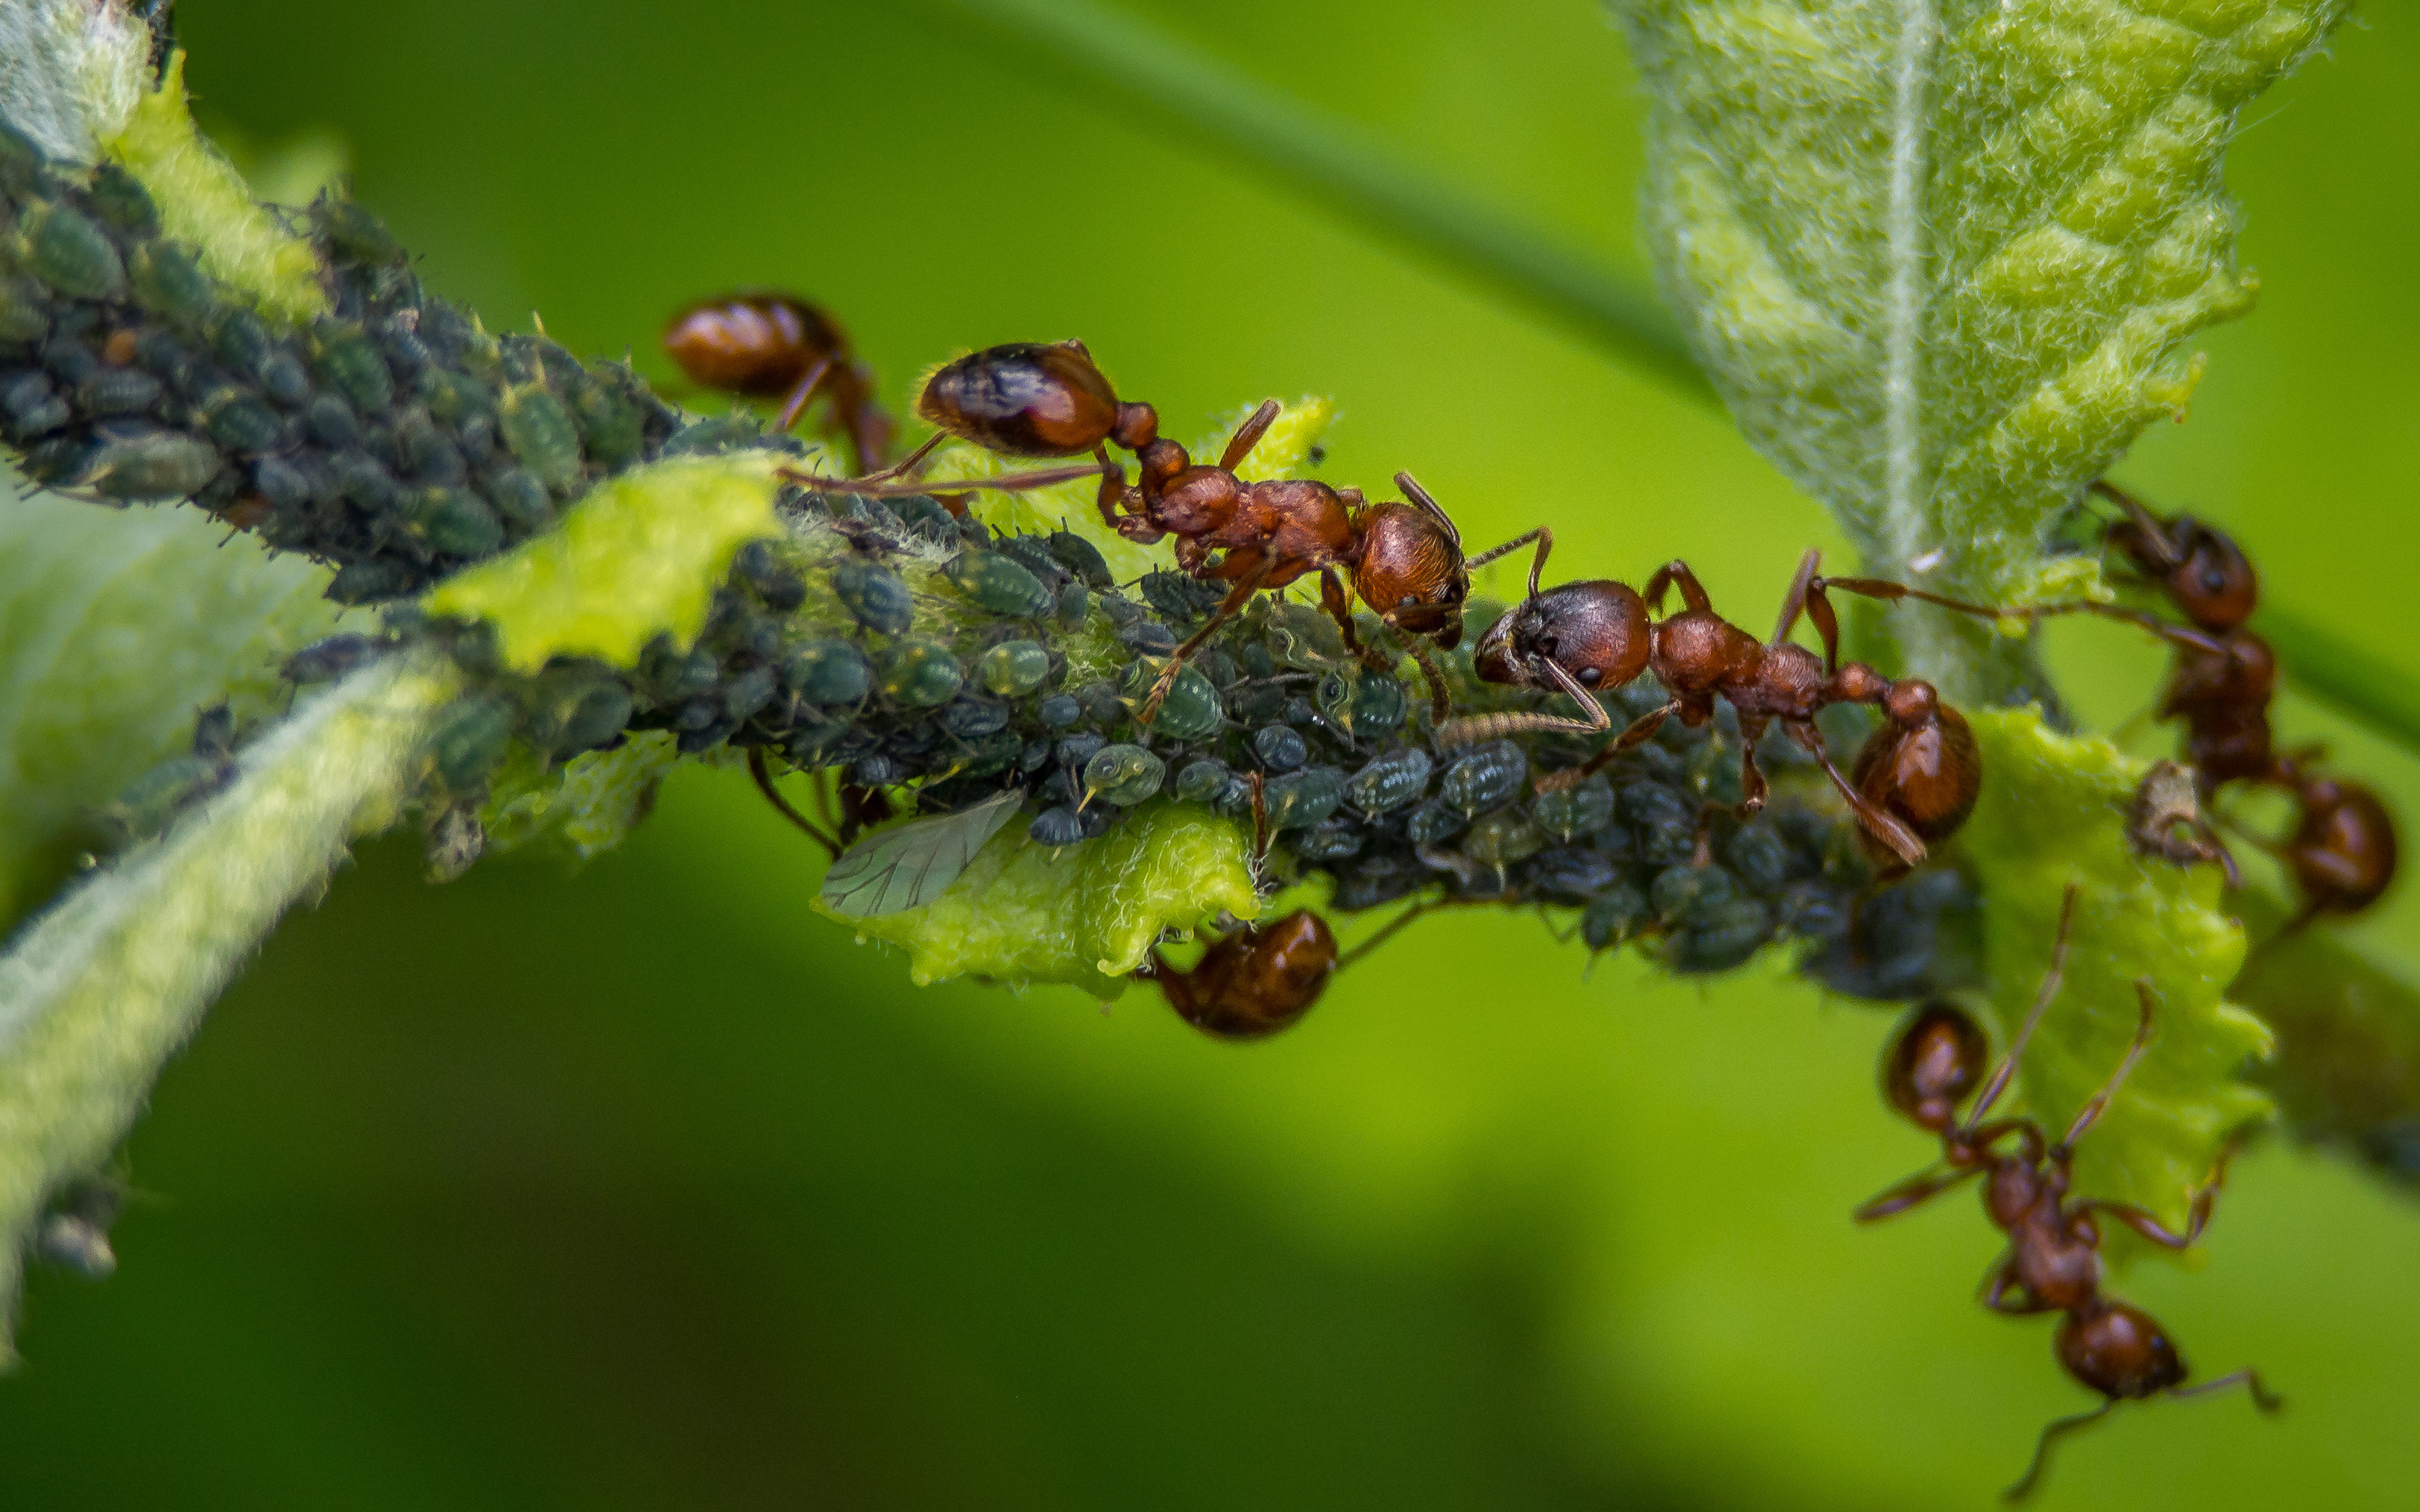 Red ant larvae, Insect breeding, HD wallpaper, Life in close-up, 3200x2000 HD Desktop